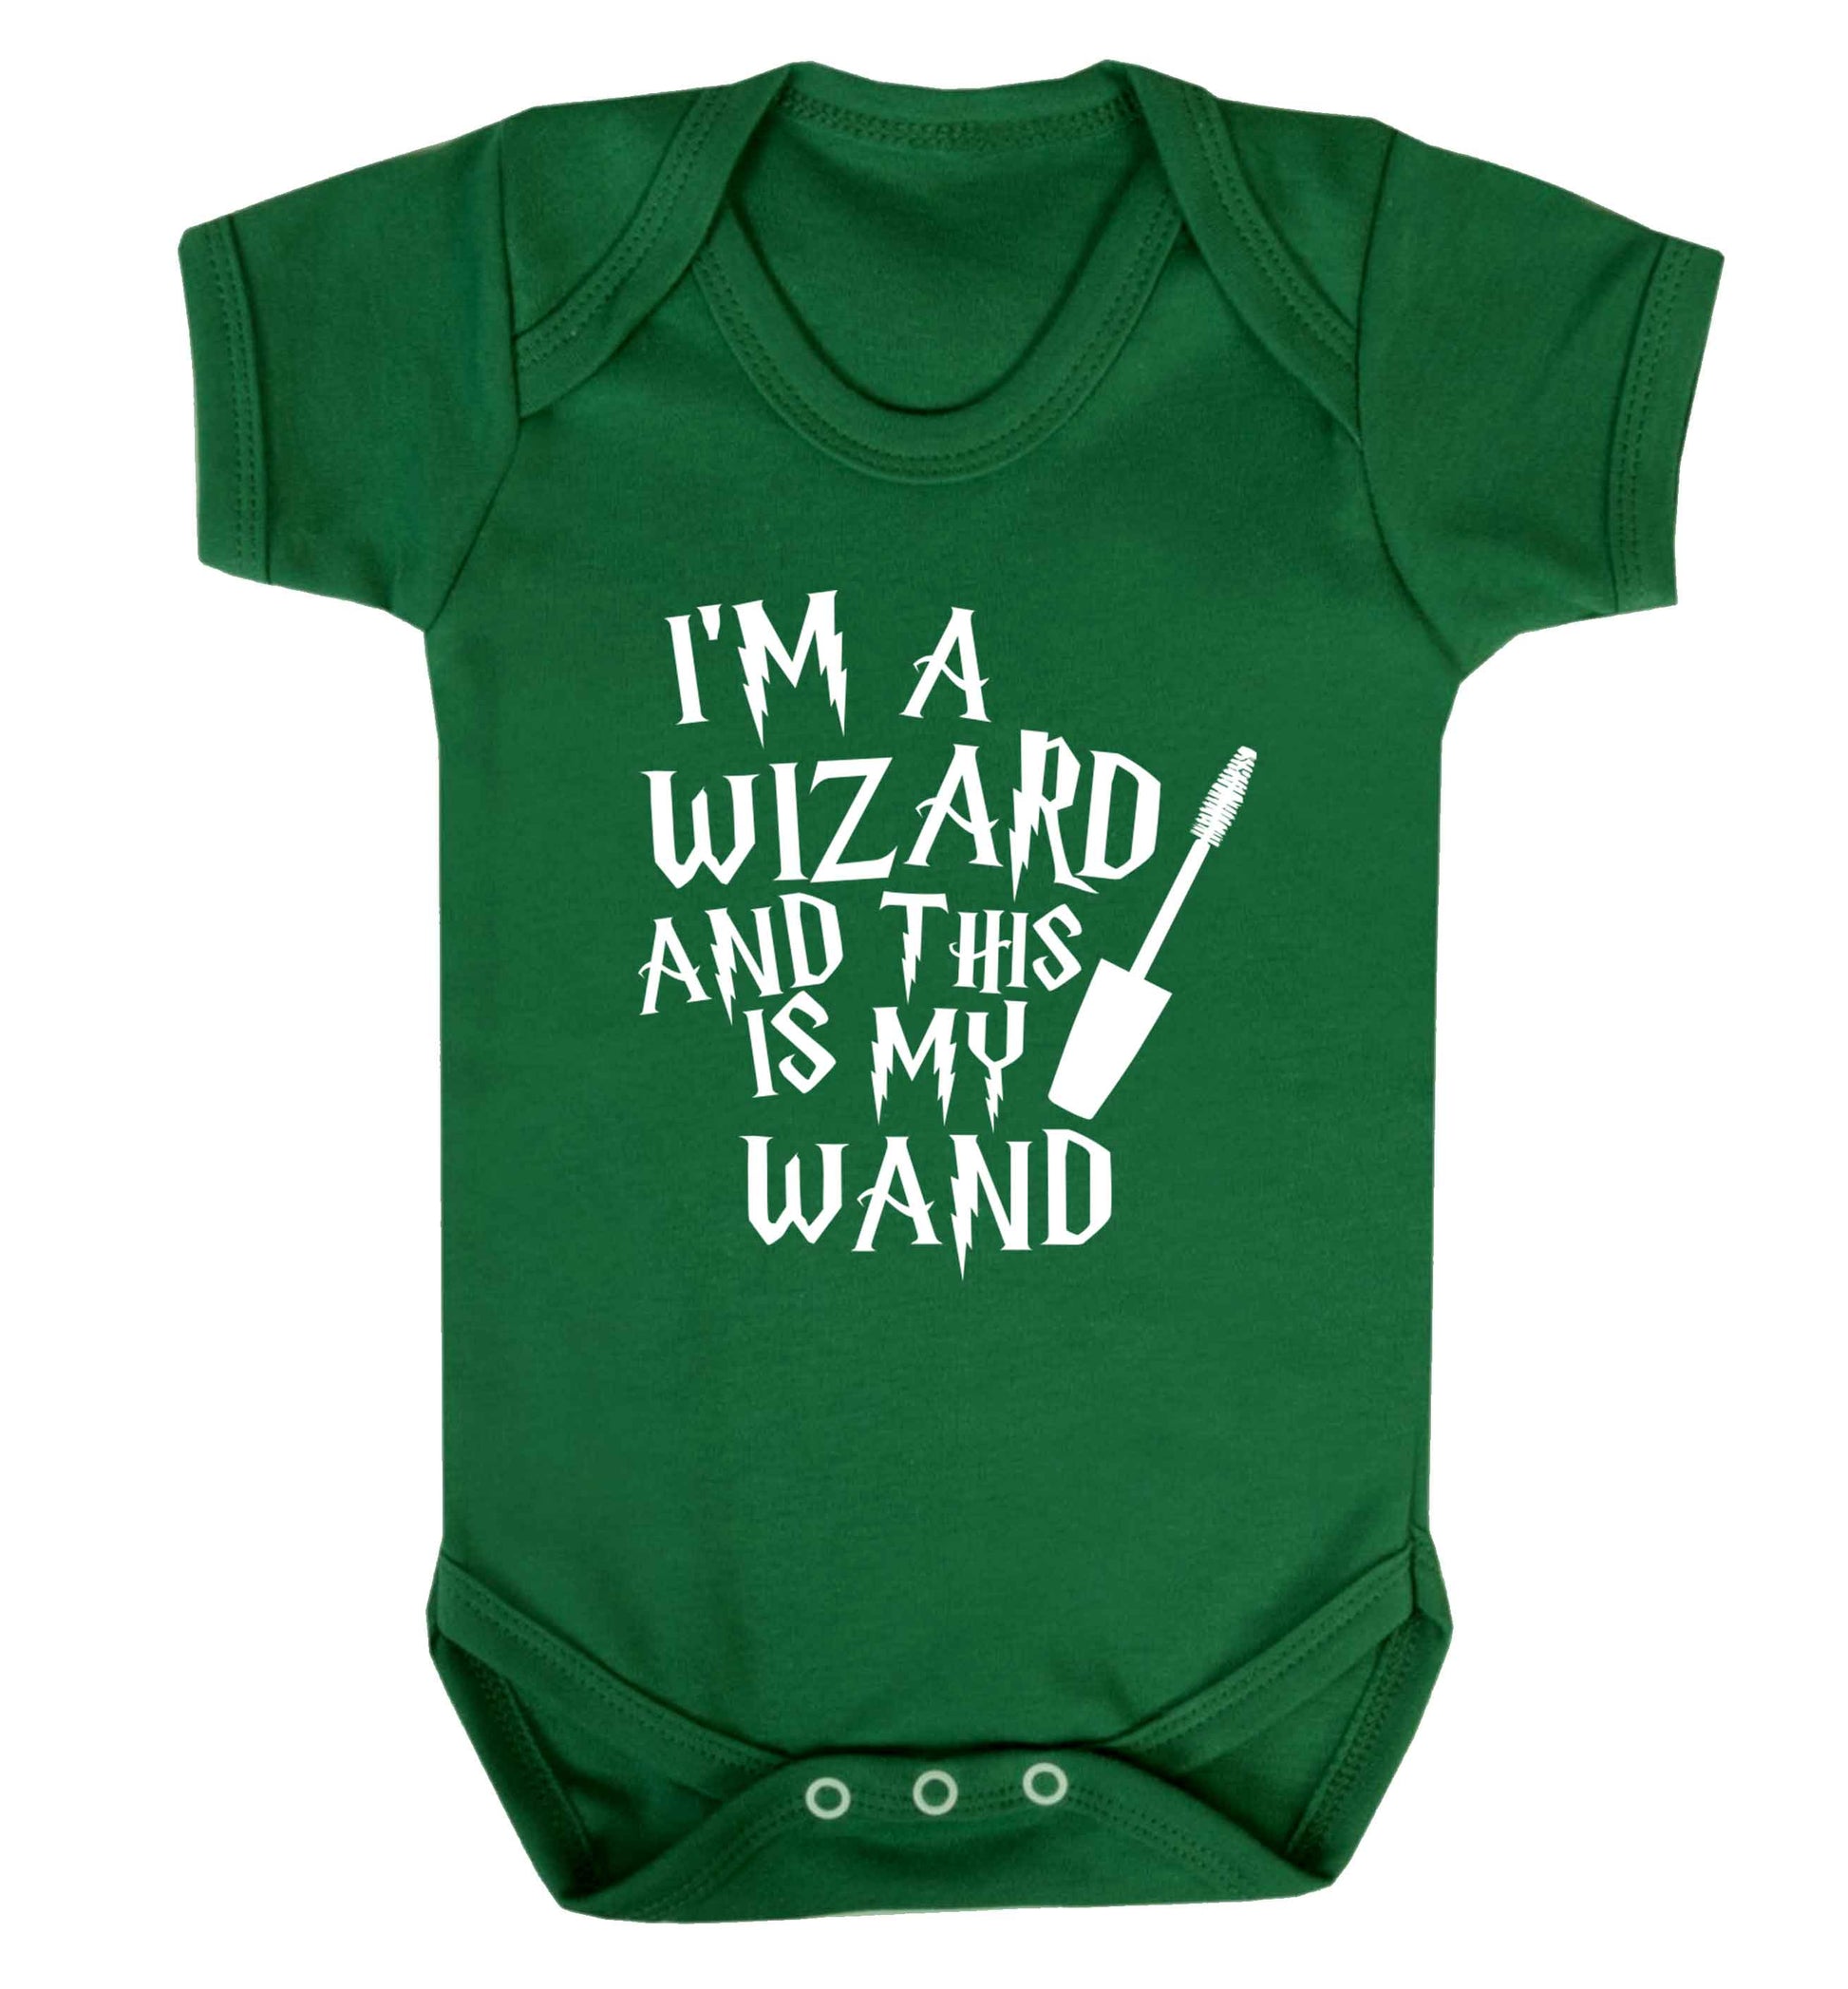 I'm a wizard and this is my wand Baby Vest green 18-24 months